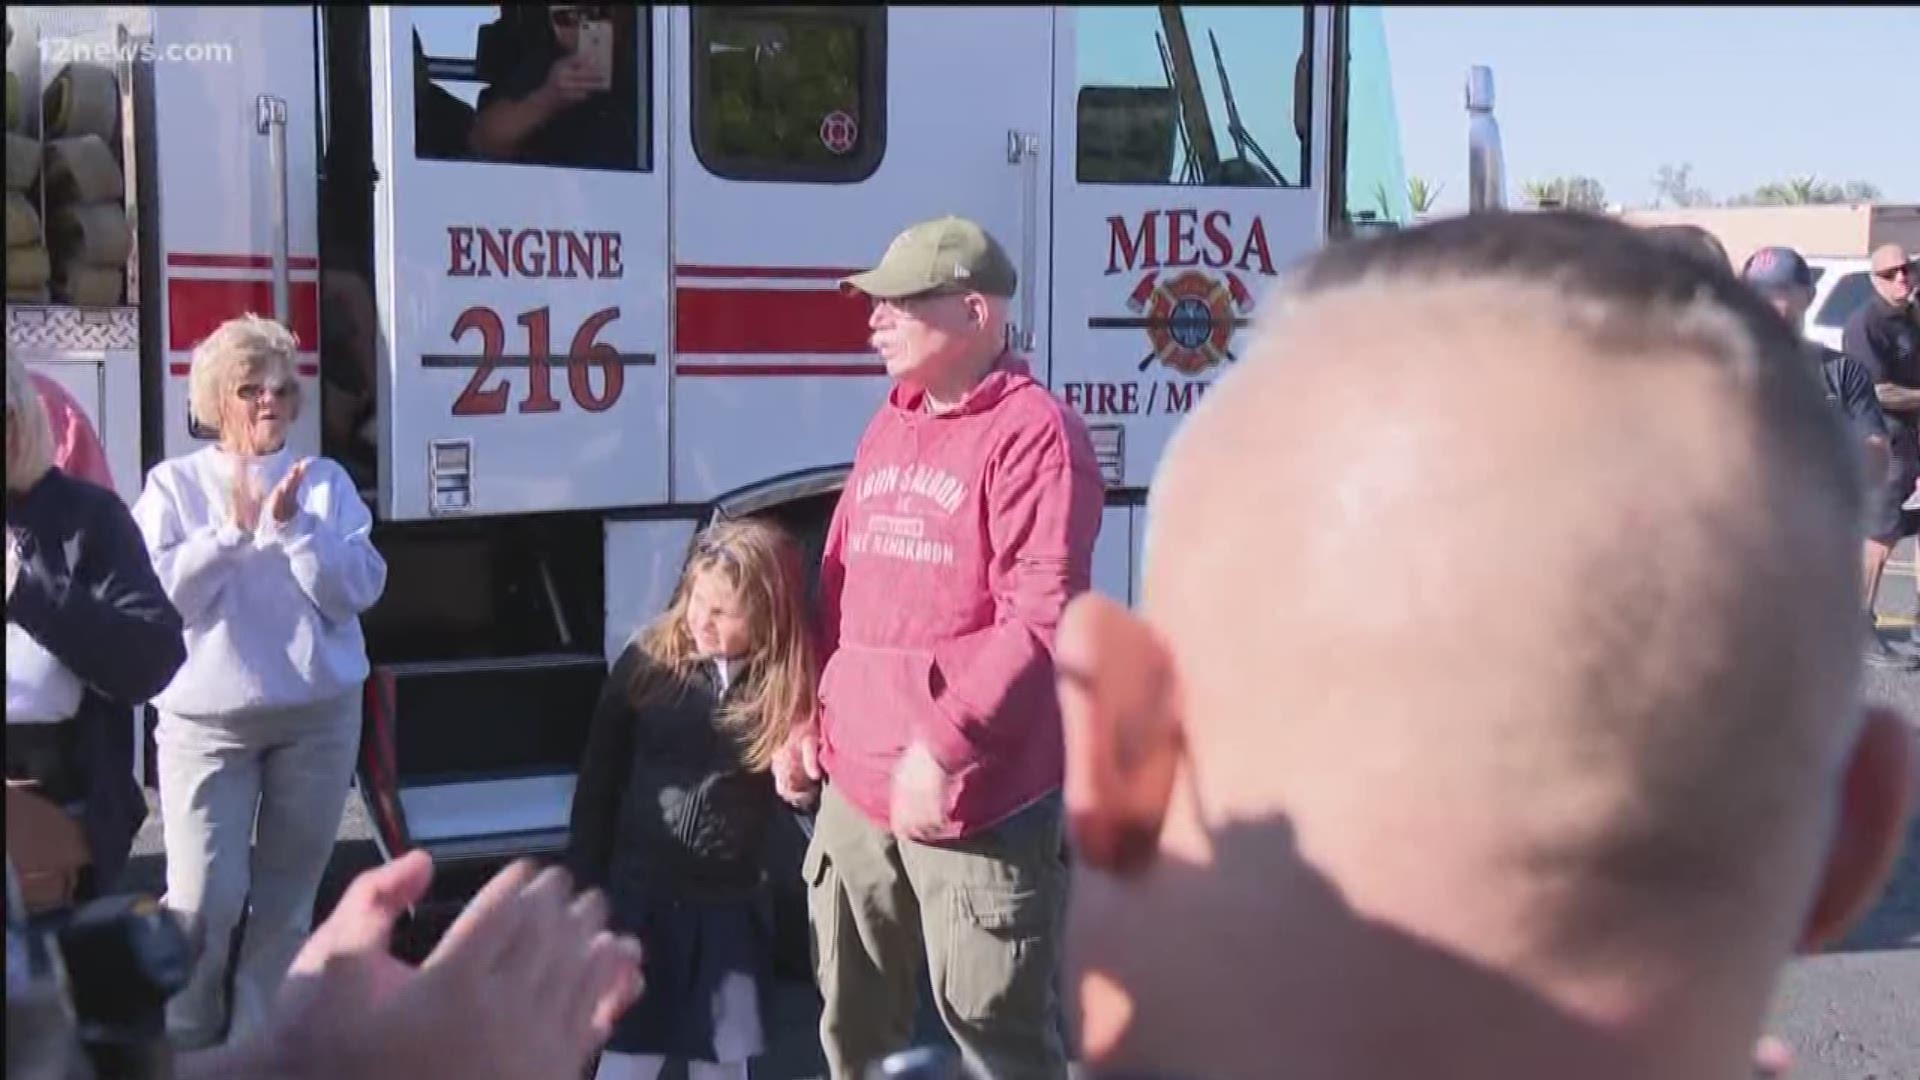 Last week Mesa firefighter Nikki Sullivan lost her battle with breast cancer. Her six-year-old daughter got a hero's escort to school in her mom's old fire truck.